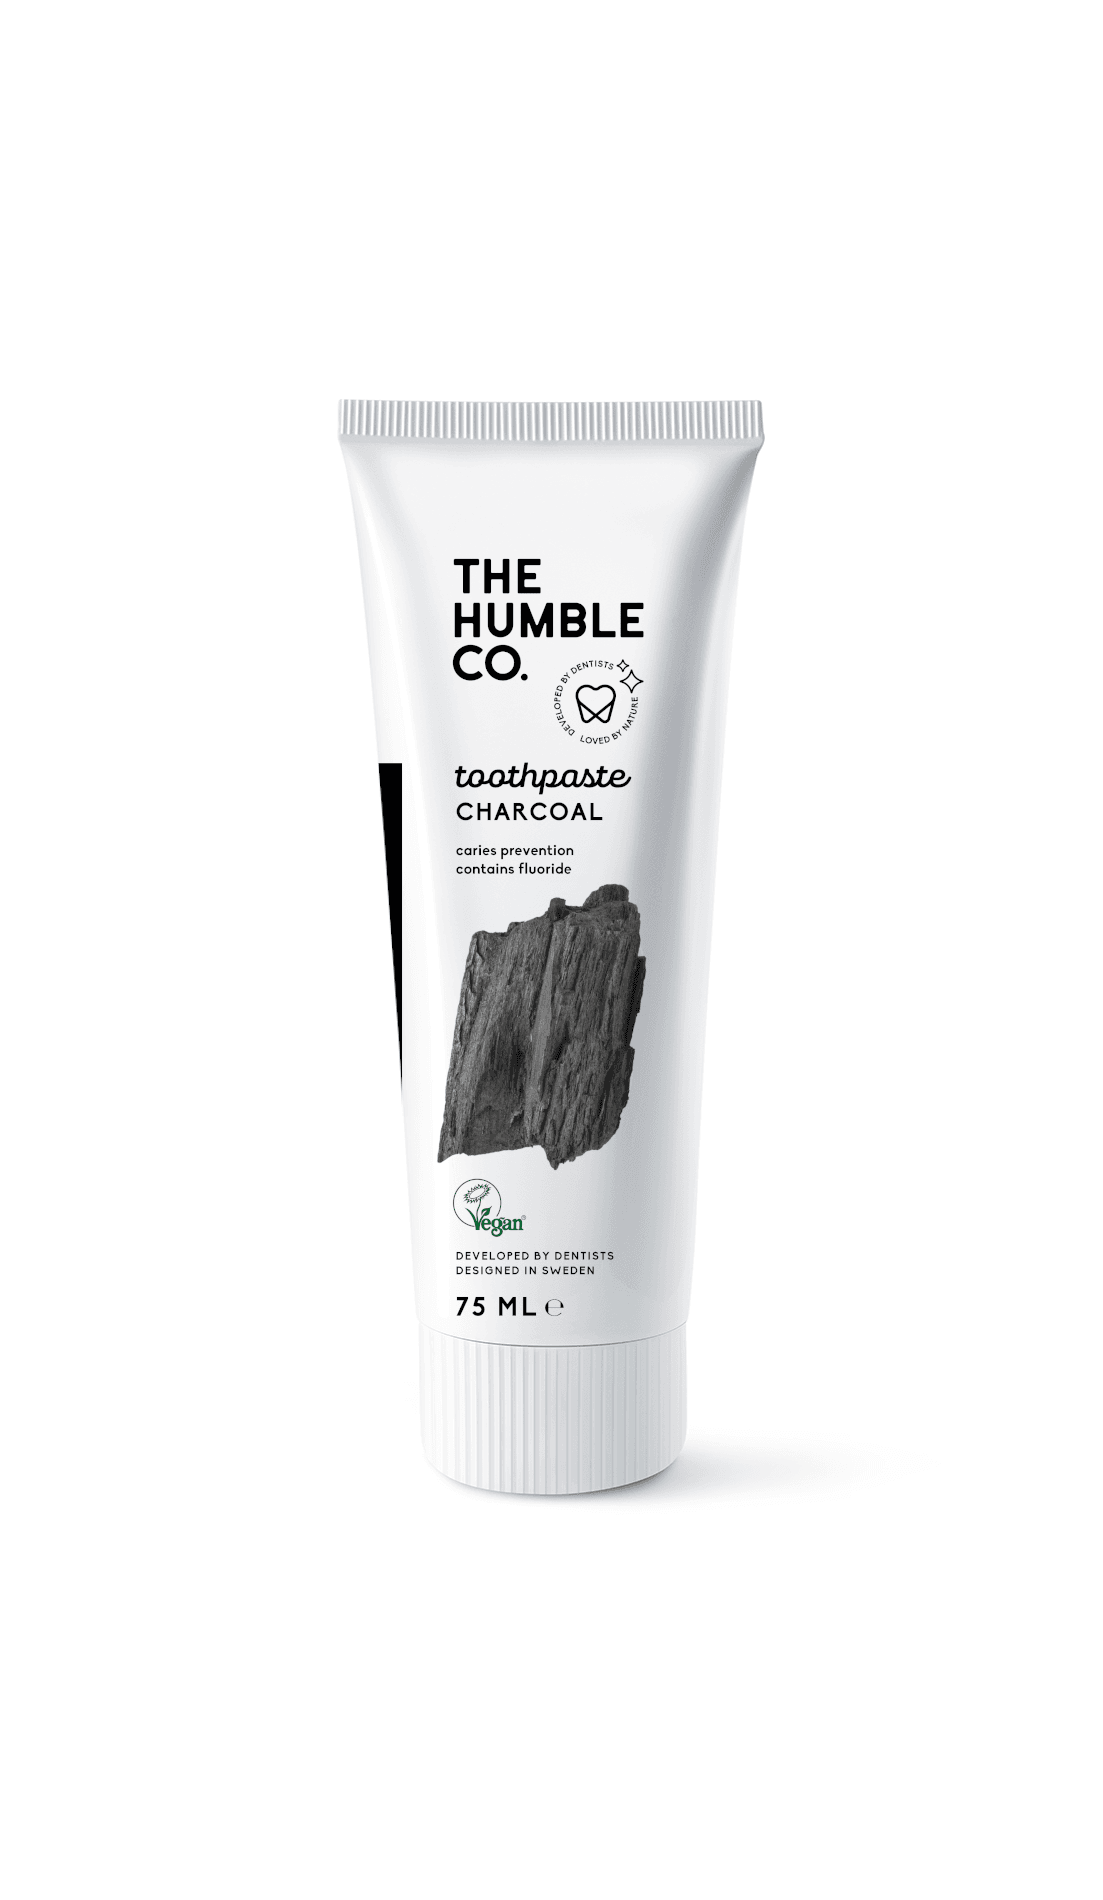 The Humble Co. natural toothpaste – charcoal with fluoride